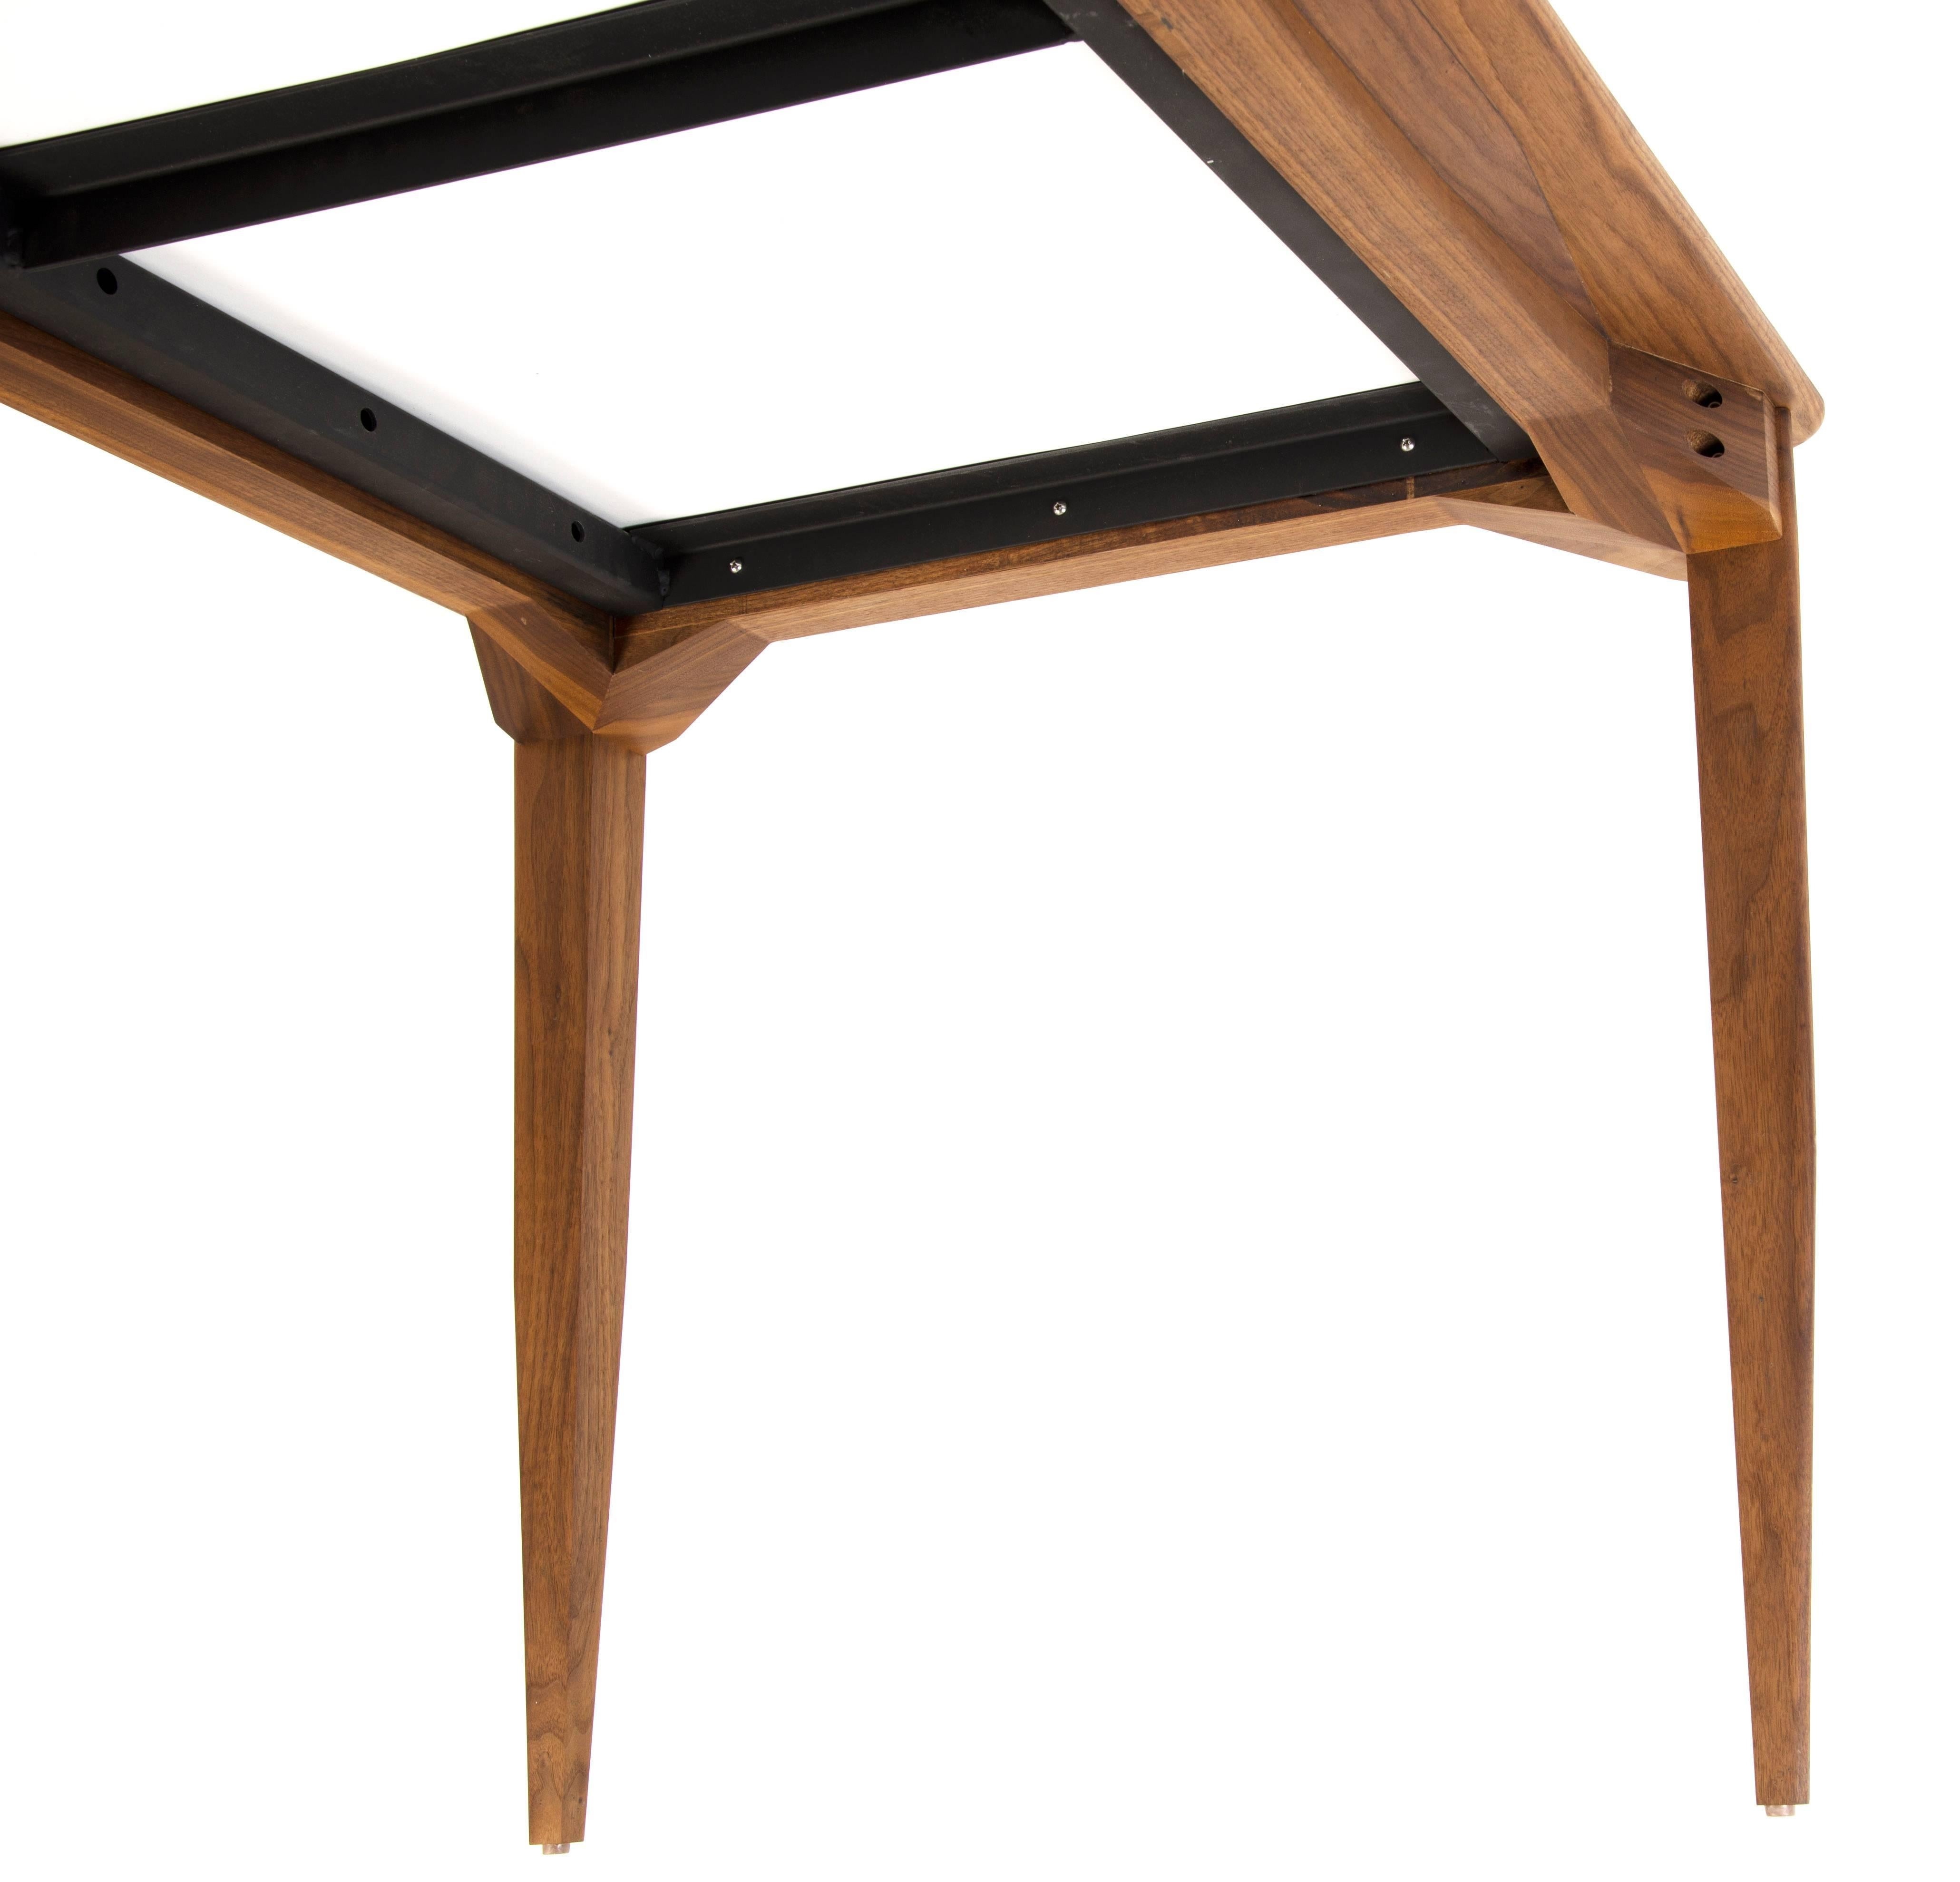 Contemporary Brindle Dining Table, Walnut wood, Honed Marble Top from CBR Studio For Sale 1